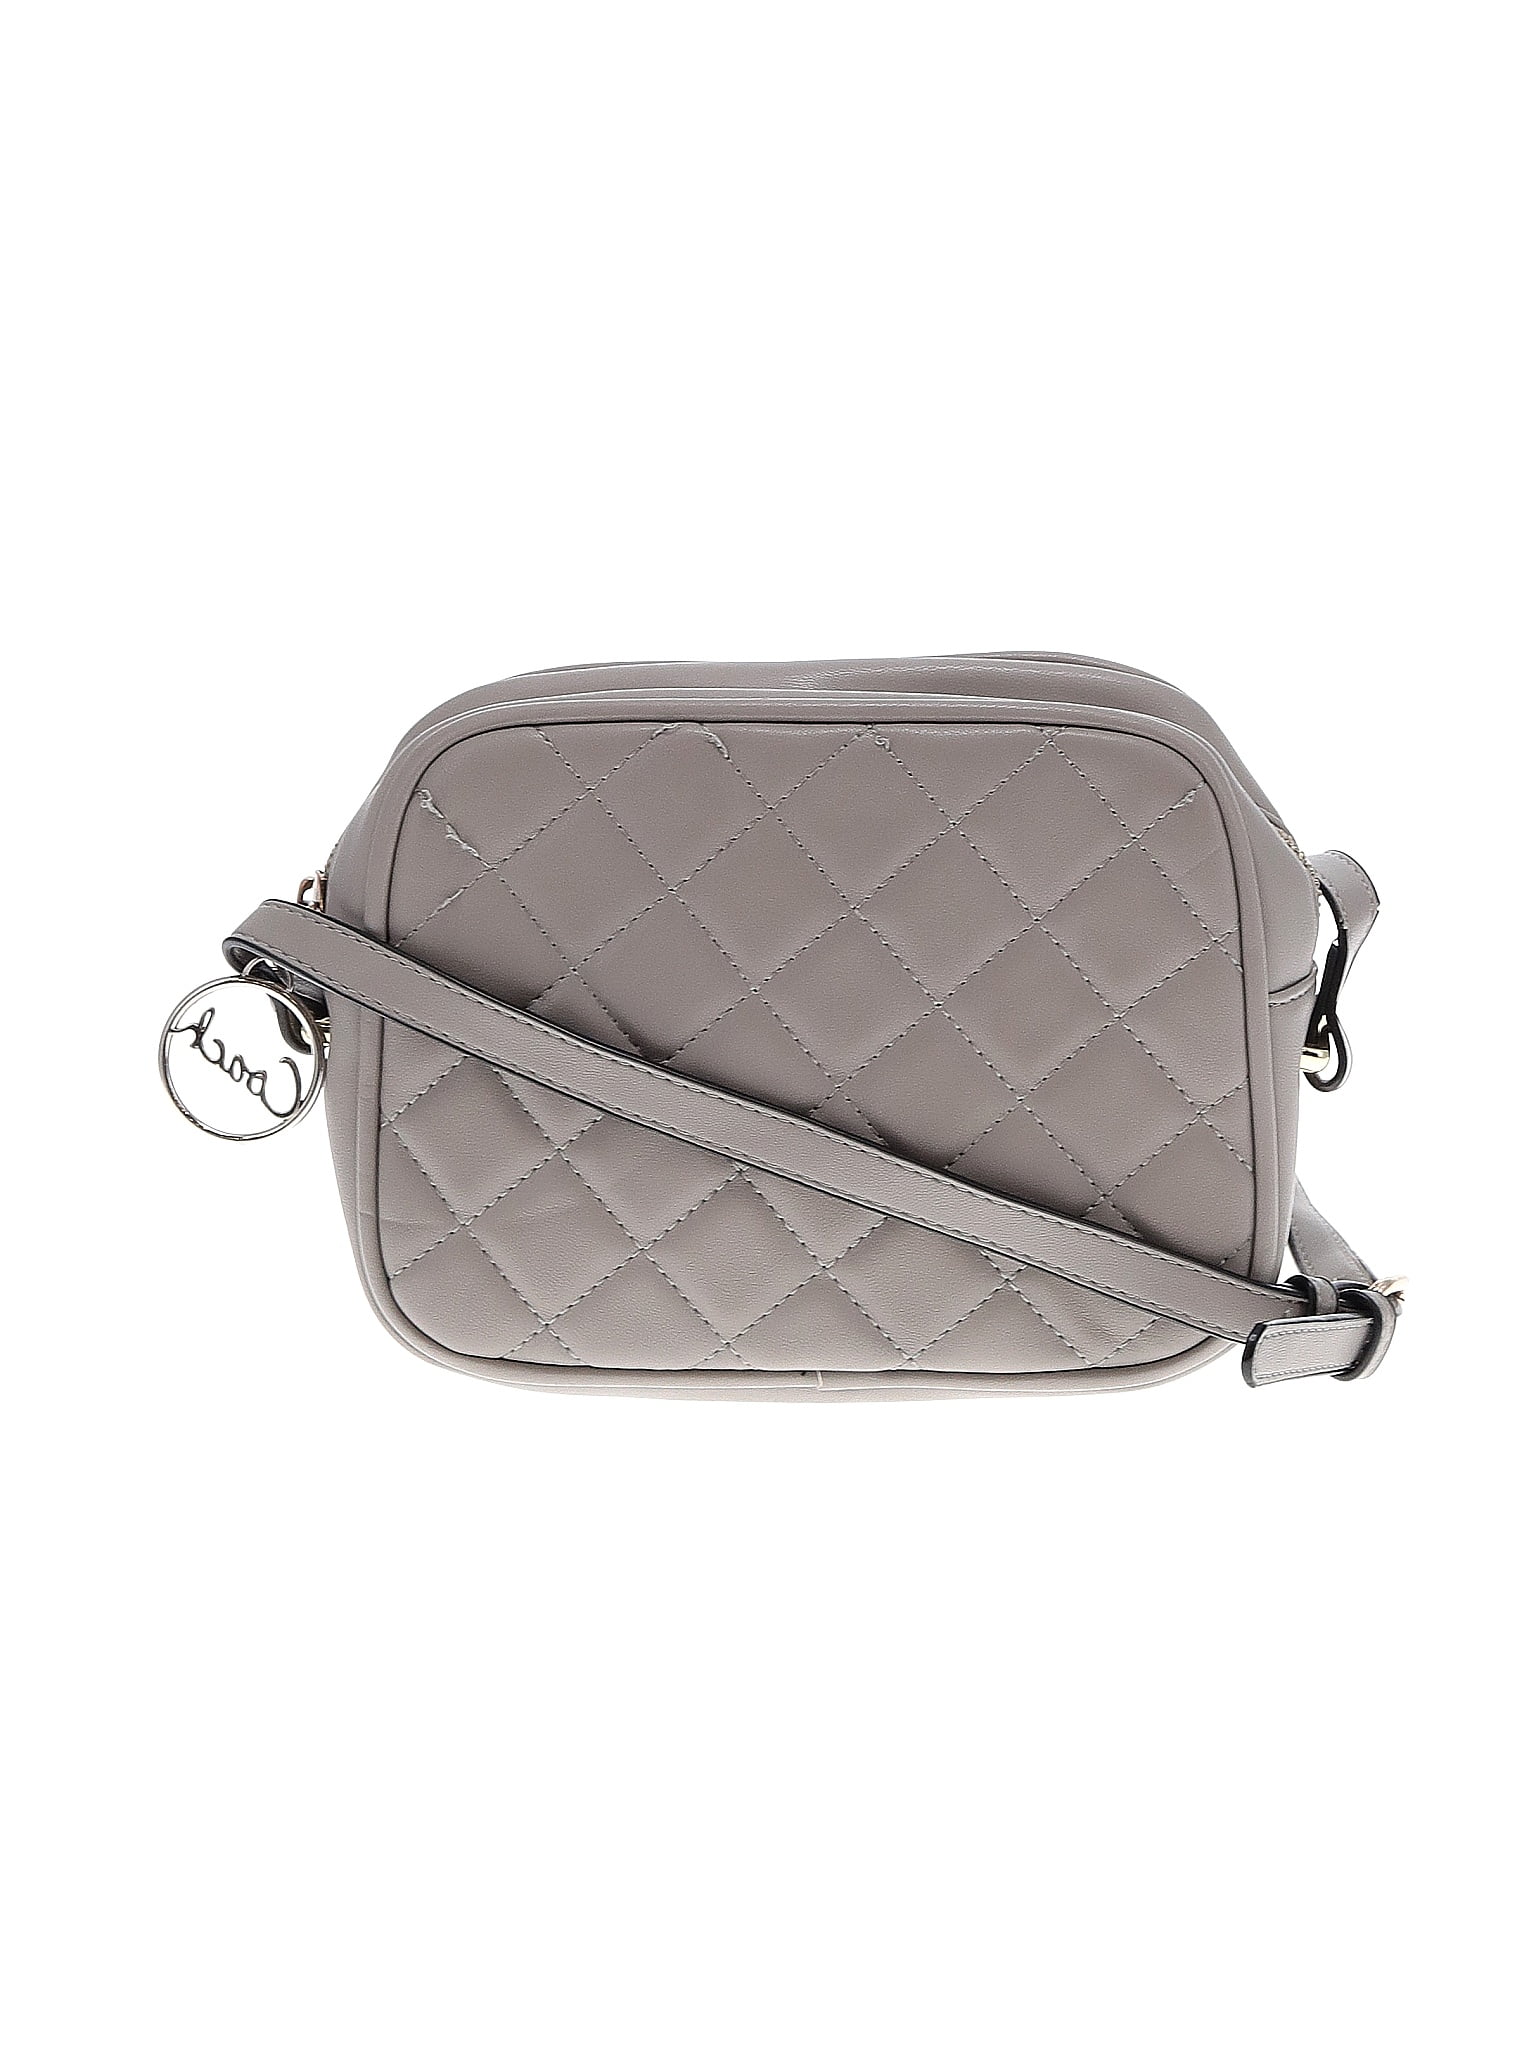 Kelly & Katie Handbags On Sale Up To 90% Off Retail